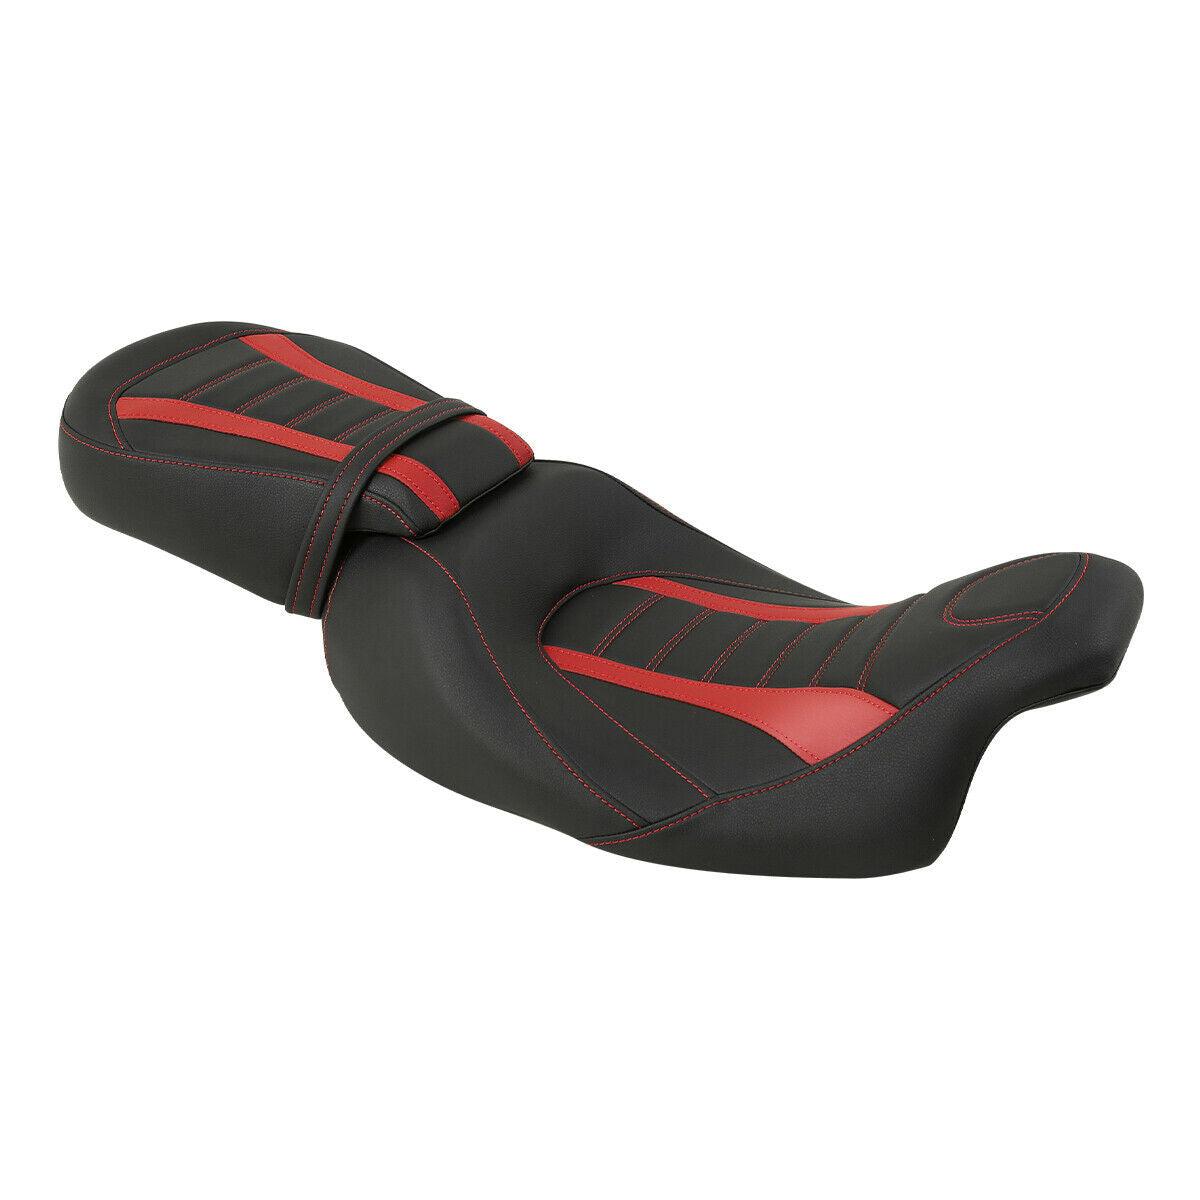 Black Red Driver Passenger Seat Fit For Harley Touring Road Glide 2009-2021 19 - Moto Life Products